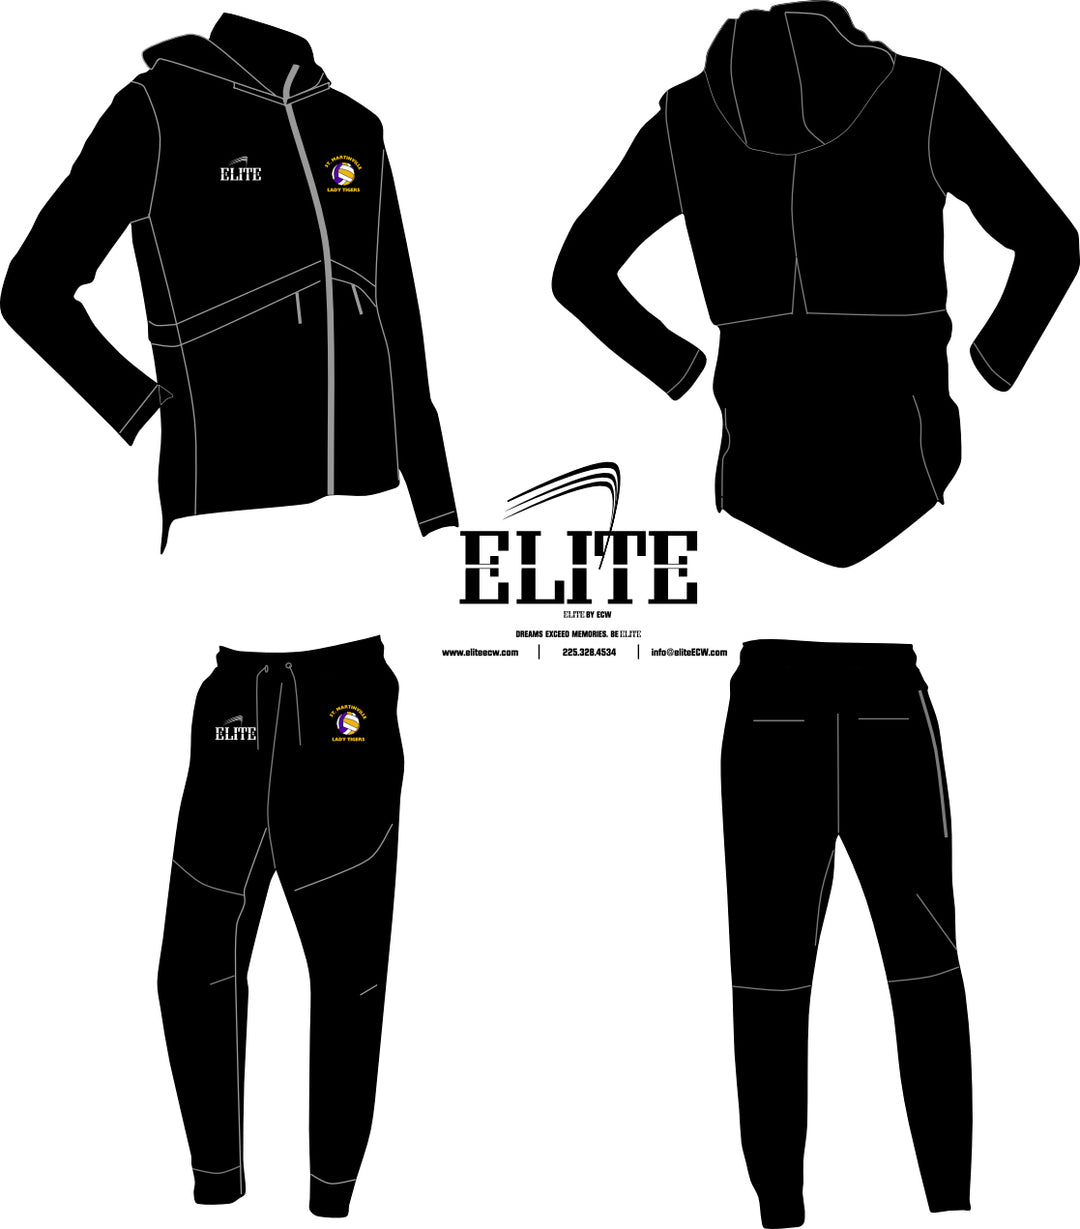 ST MARTINVILLE JACKET AND PANTS - Elite by ECW - Team Sports